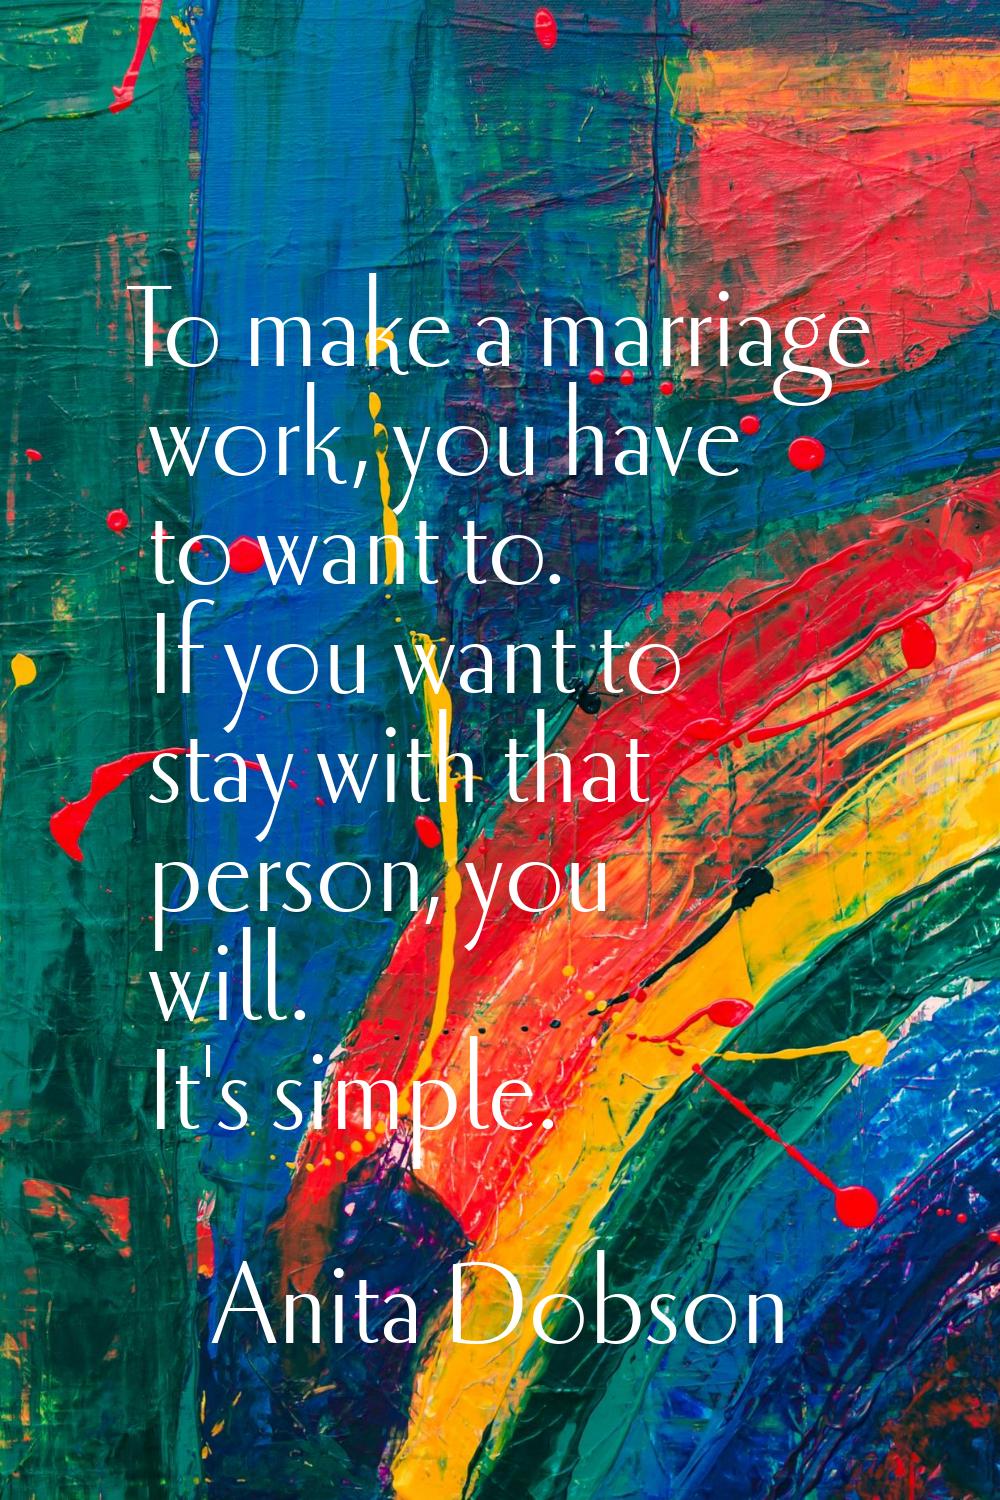 To make a marriage work, you have to want to. If you want to stay with that person, you will. It's 